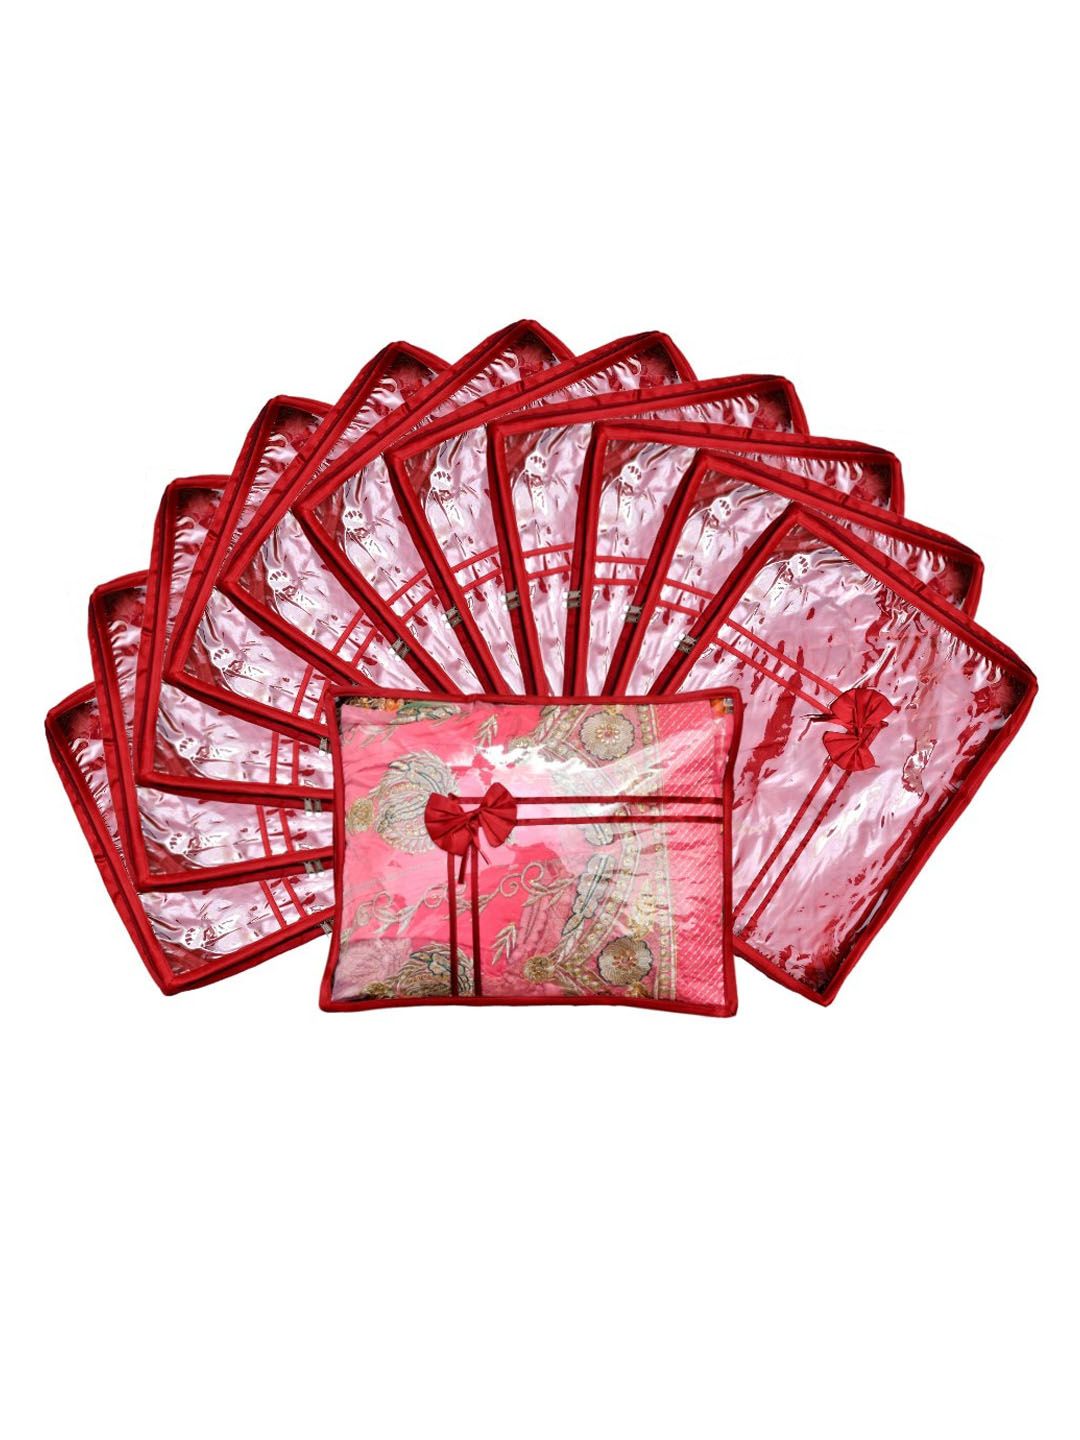 Kuber Industries Set Of 12 Maroon & Transparent Solid Satin Single Packing Saree Cover Organizers Price in India